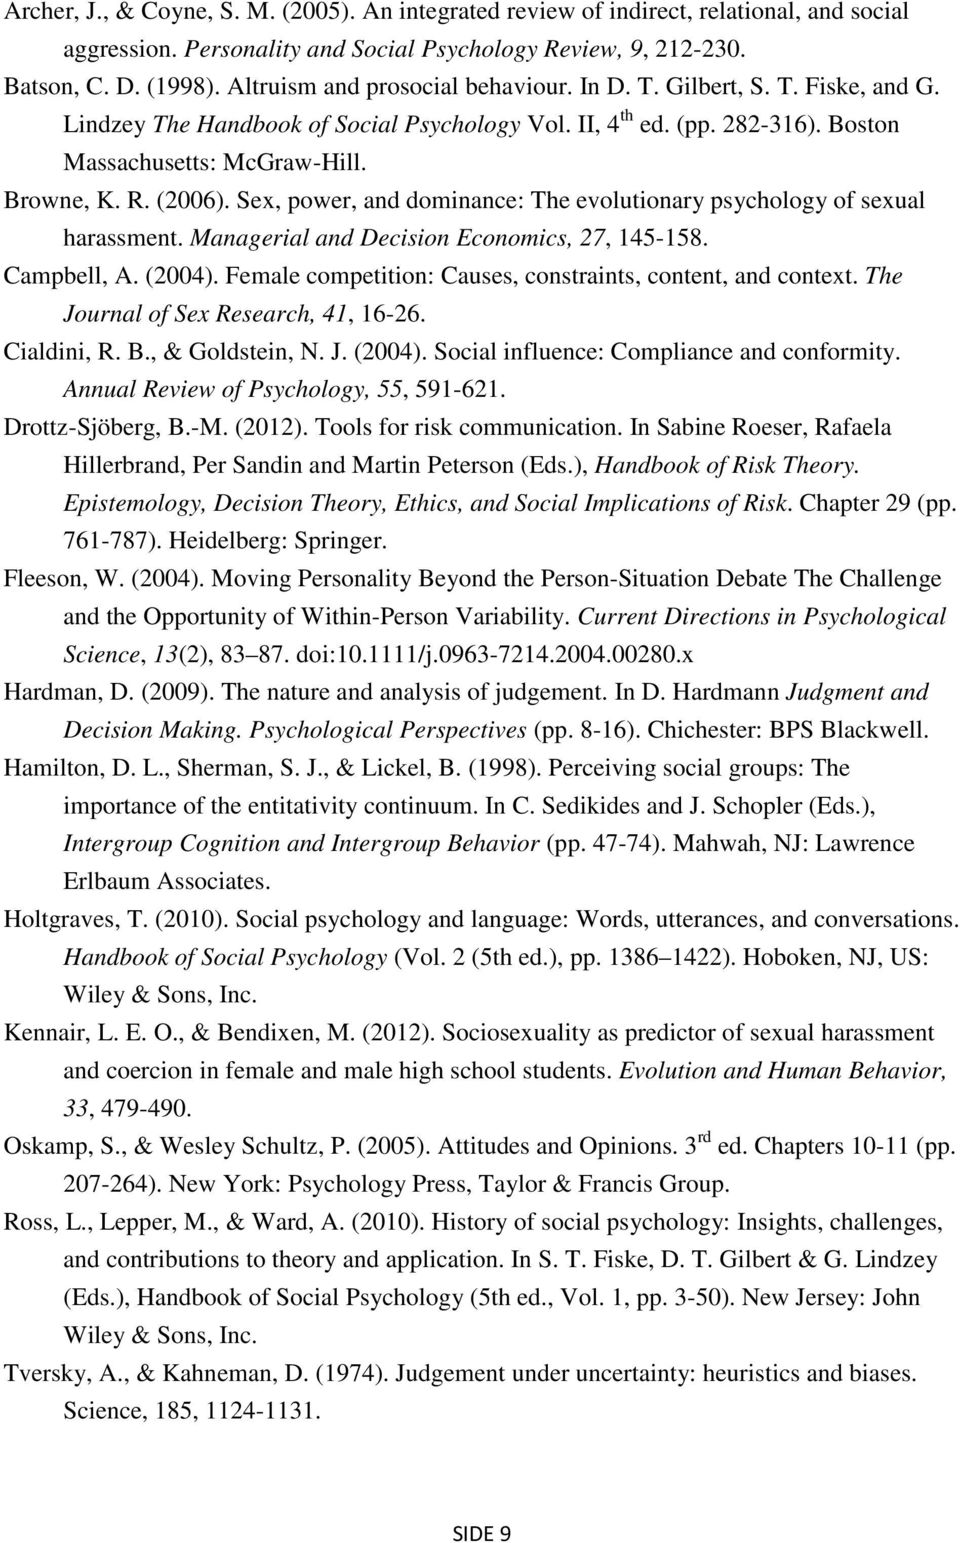 (2006). Sex, power, and dominance: The evolutionary psychology of sexual harassment. Managerial and Decision Economics, 27, 145-158. Campbell, A. (2004).